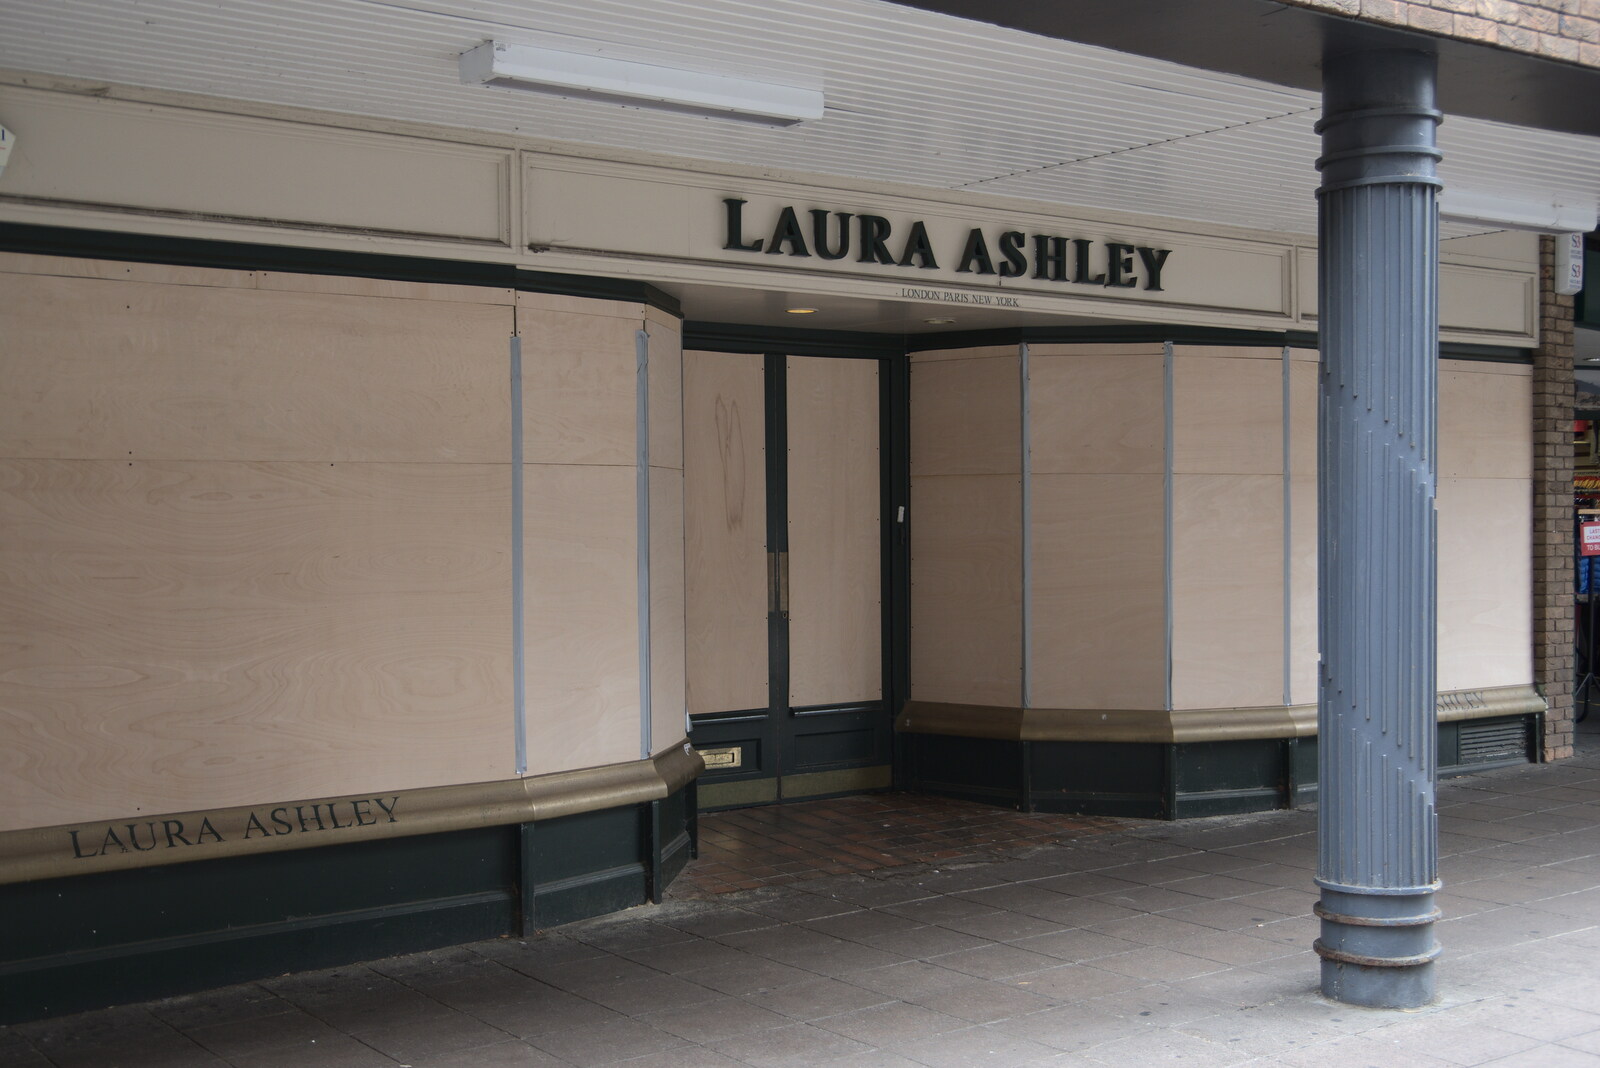 The boarded-up Laura Ashley on London Street from Dippy and the City Dinosaur Trail, Norwich, Norfolk - 19th August 2021